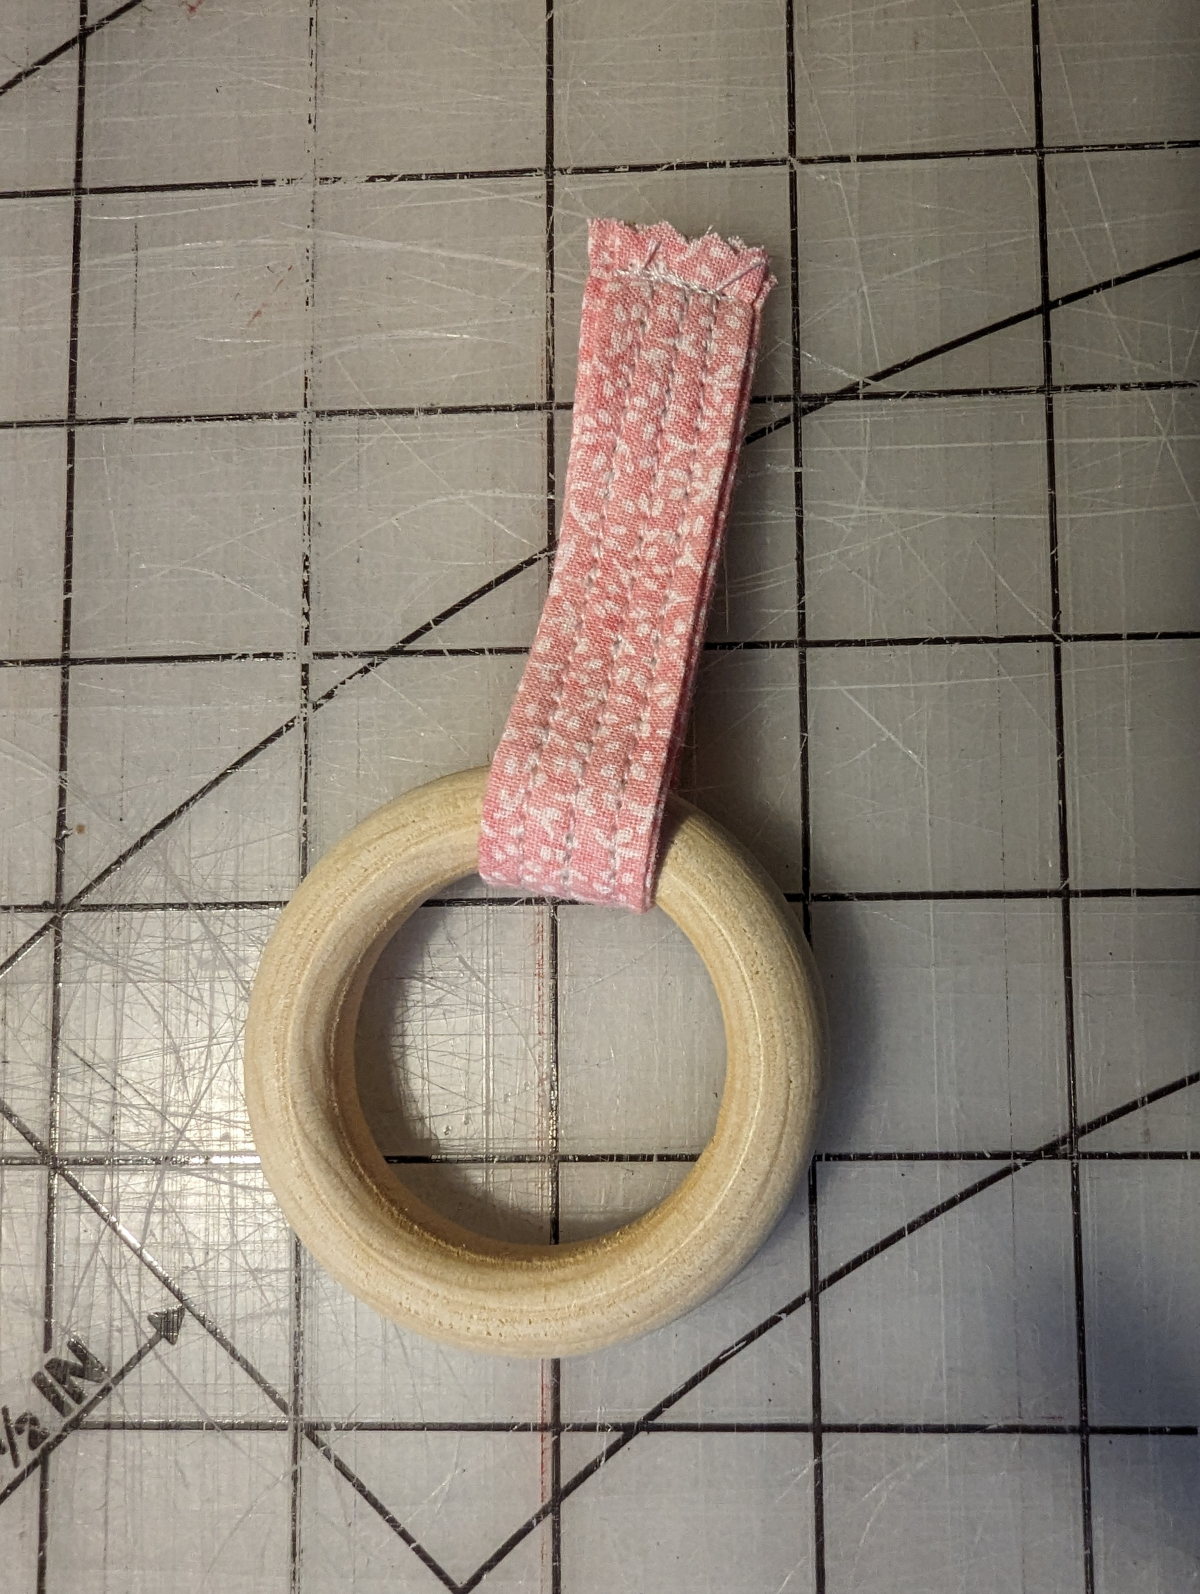 Loop fabric folded and sewn around the wooden ring